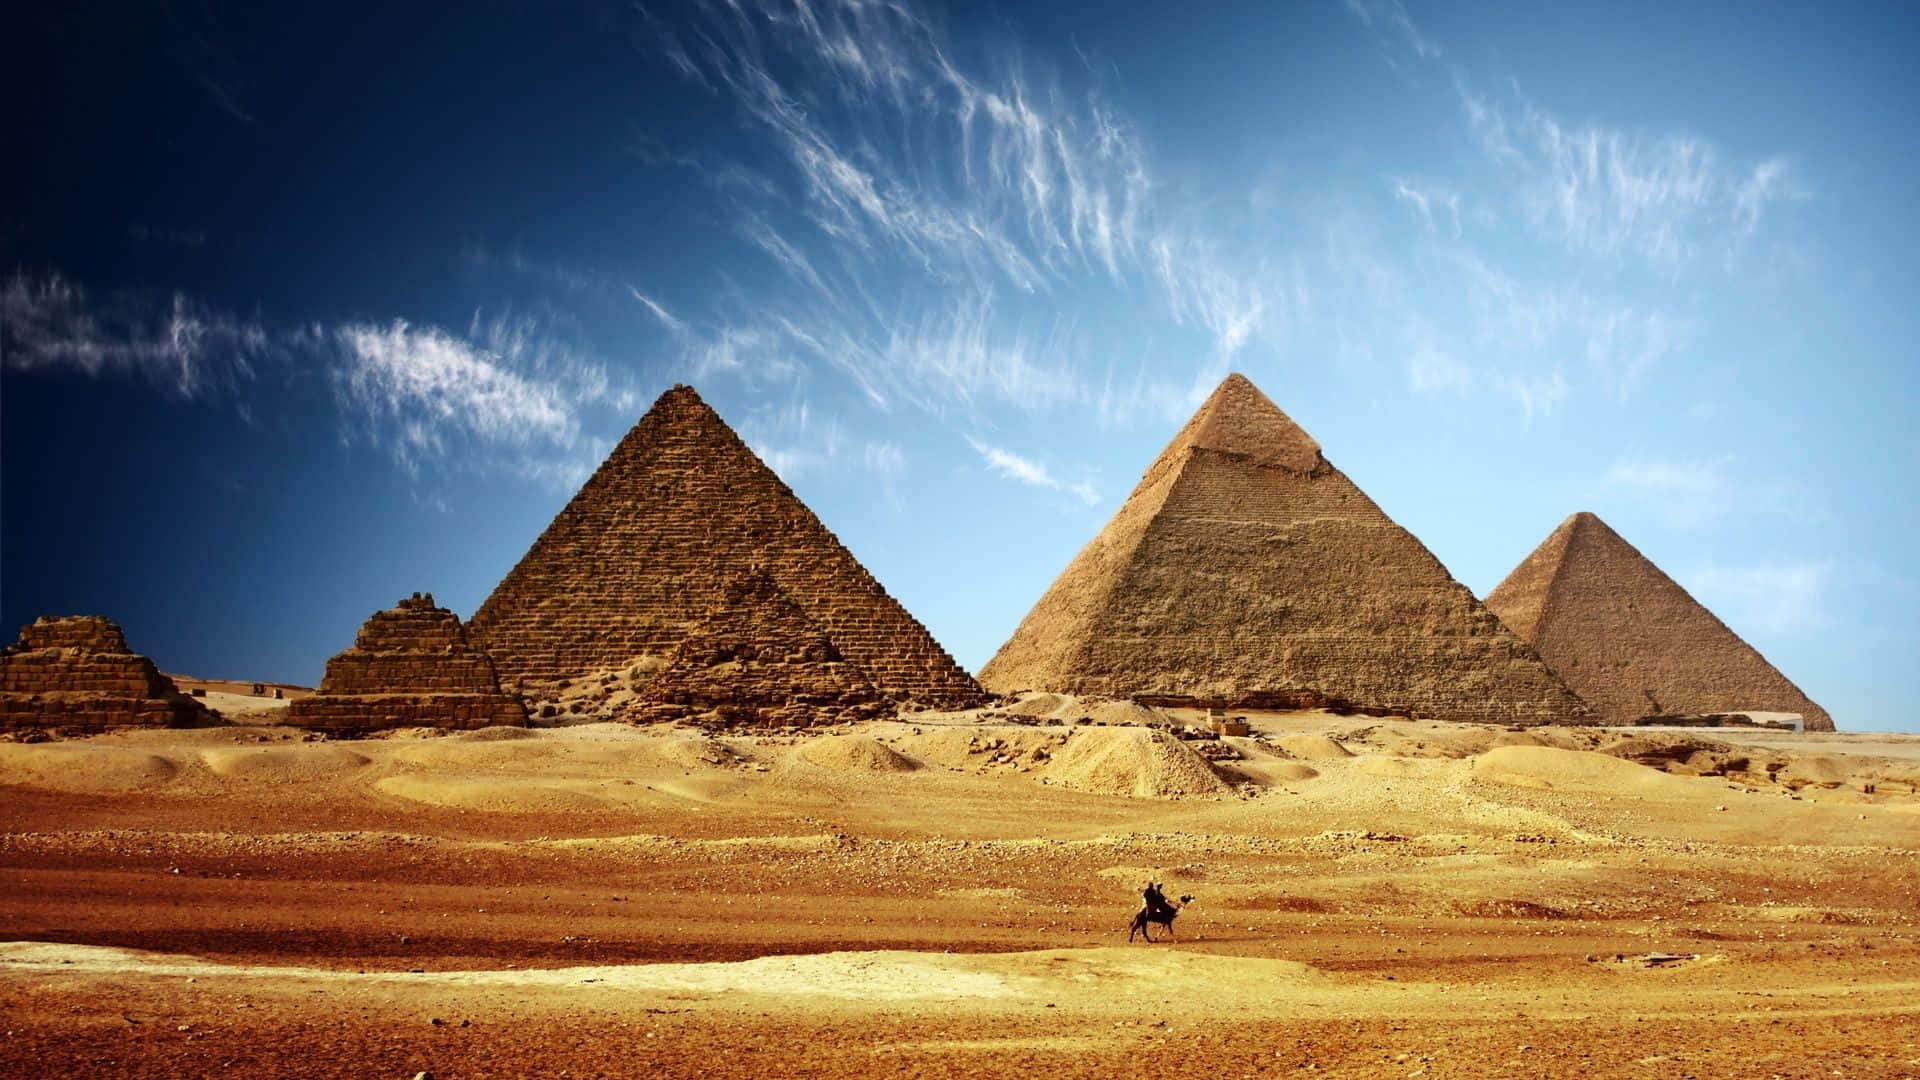 A Man Walks Through The Desert With The Pyramids In The Background